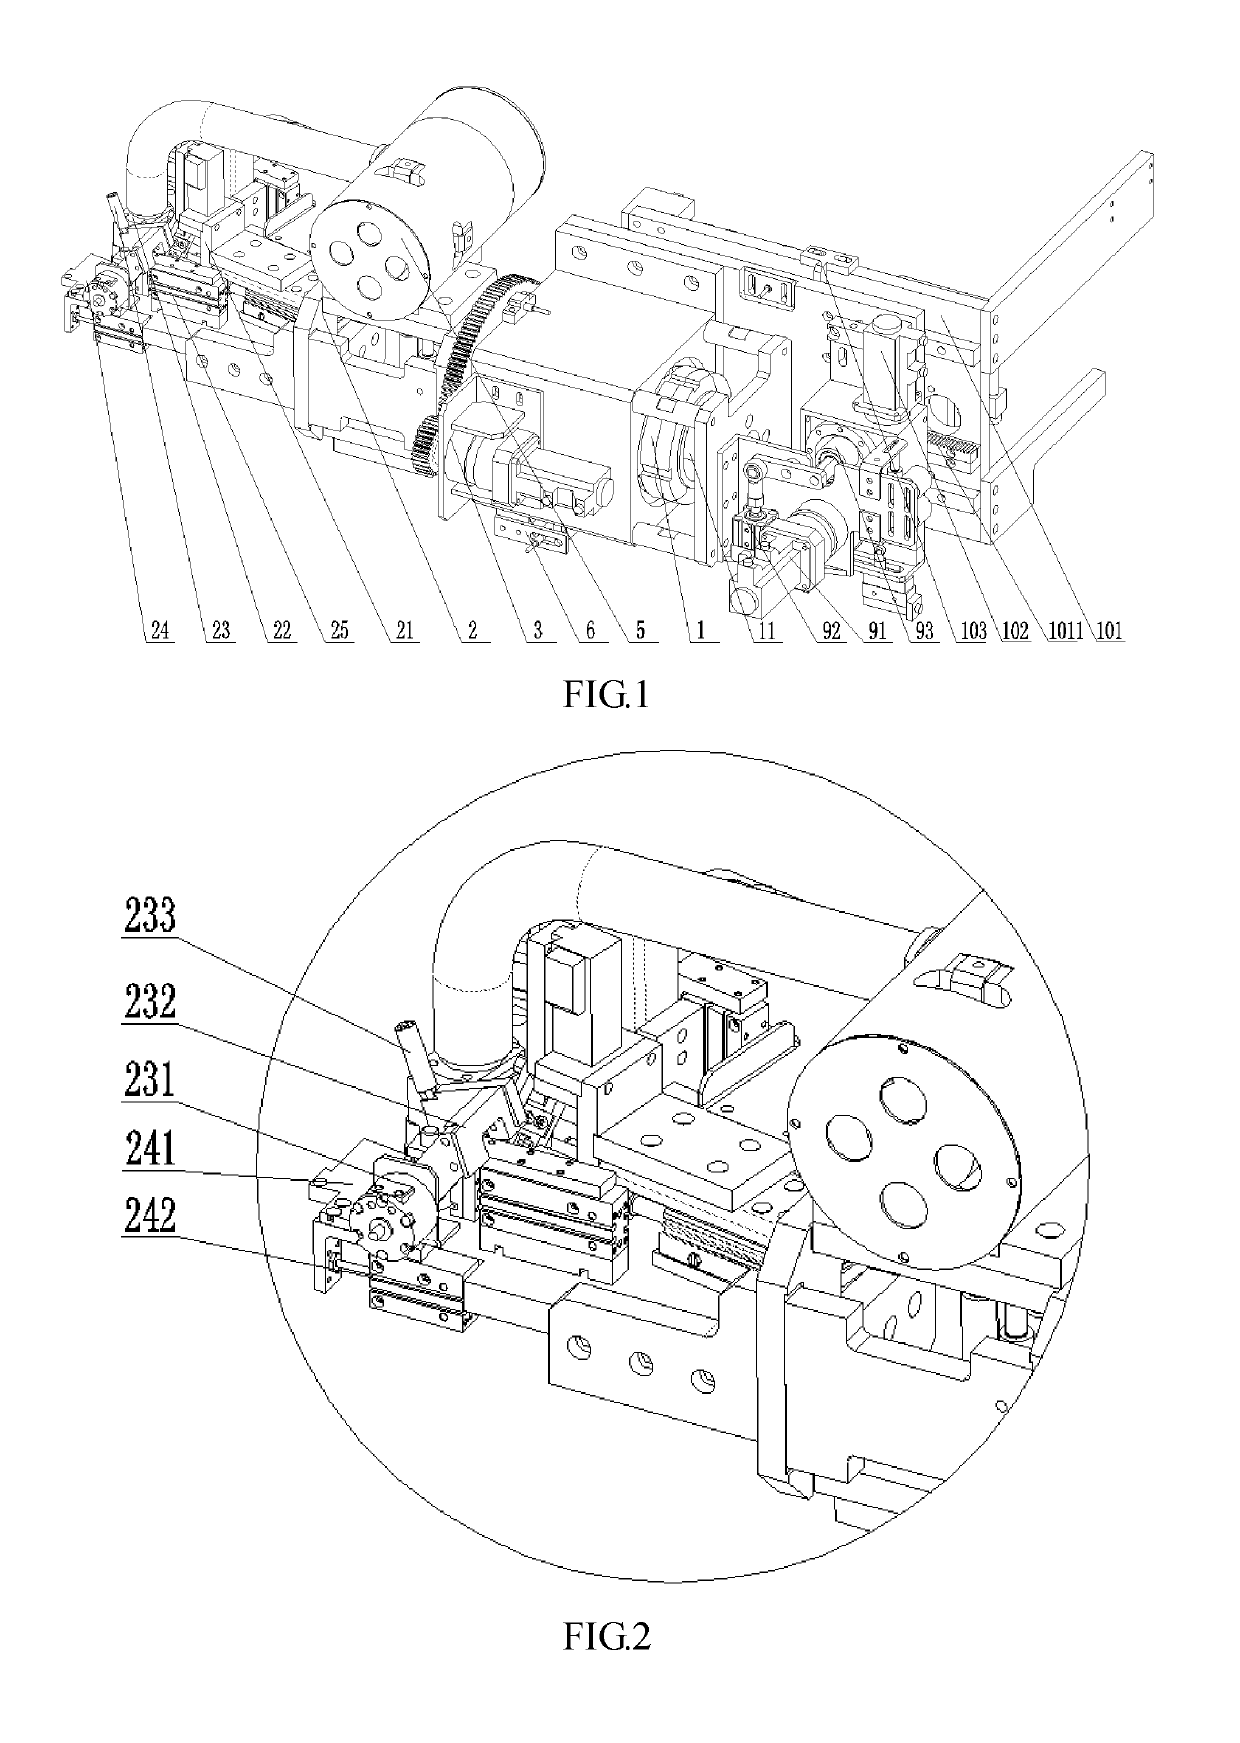 Apparatus for pasting warm edge spacer